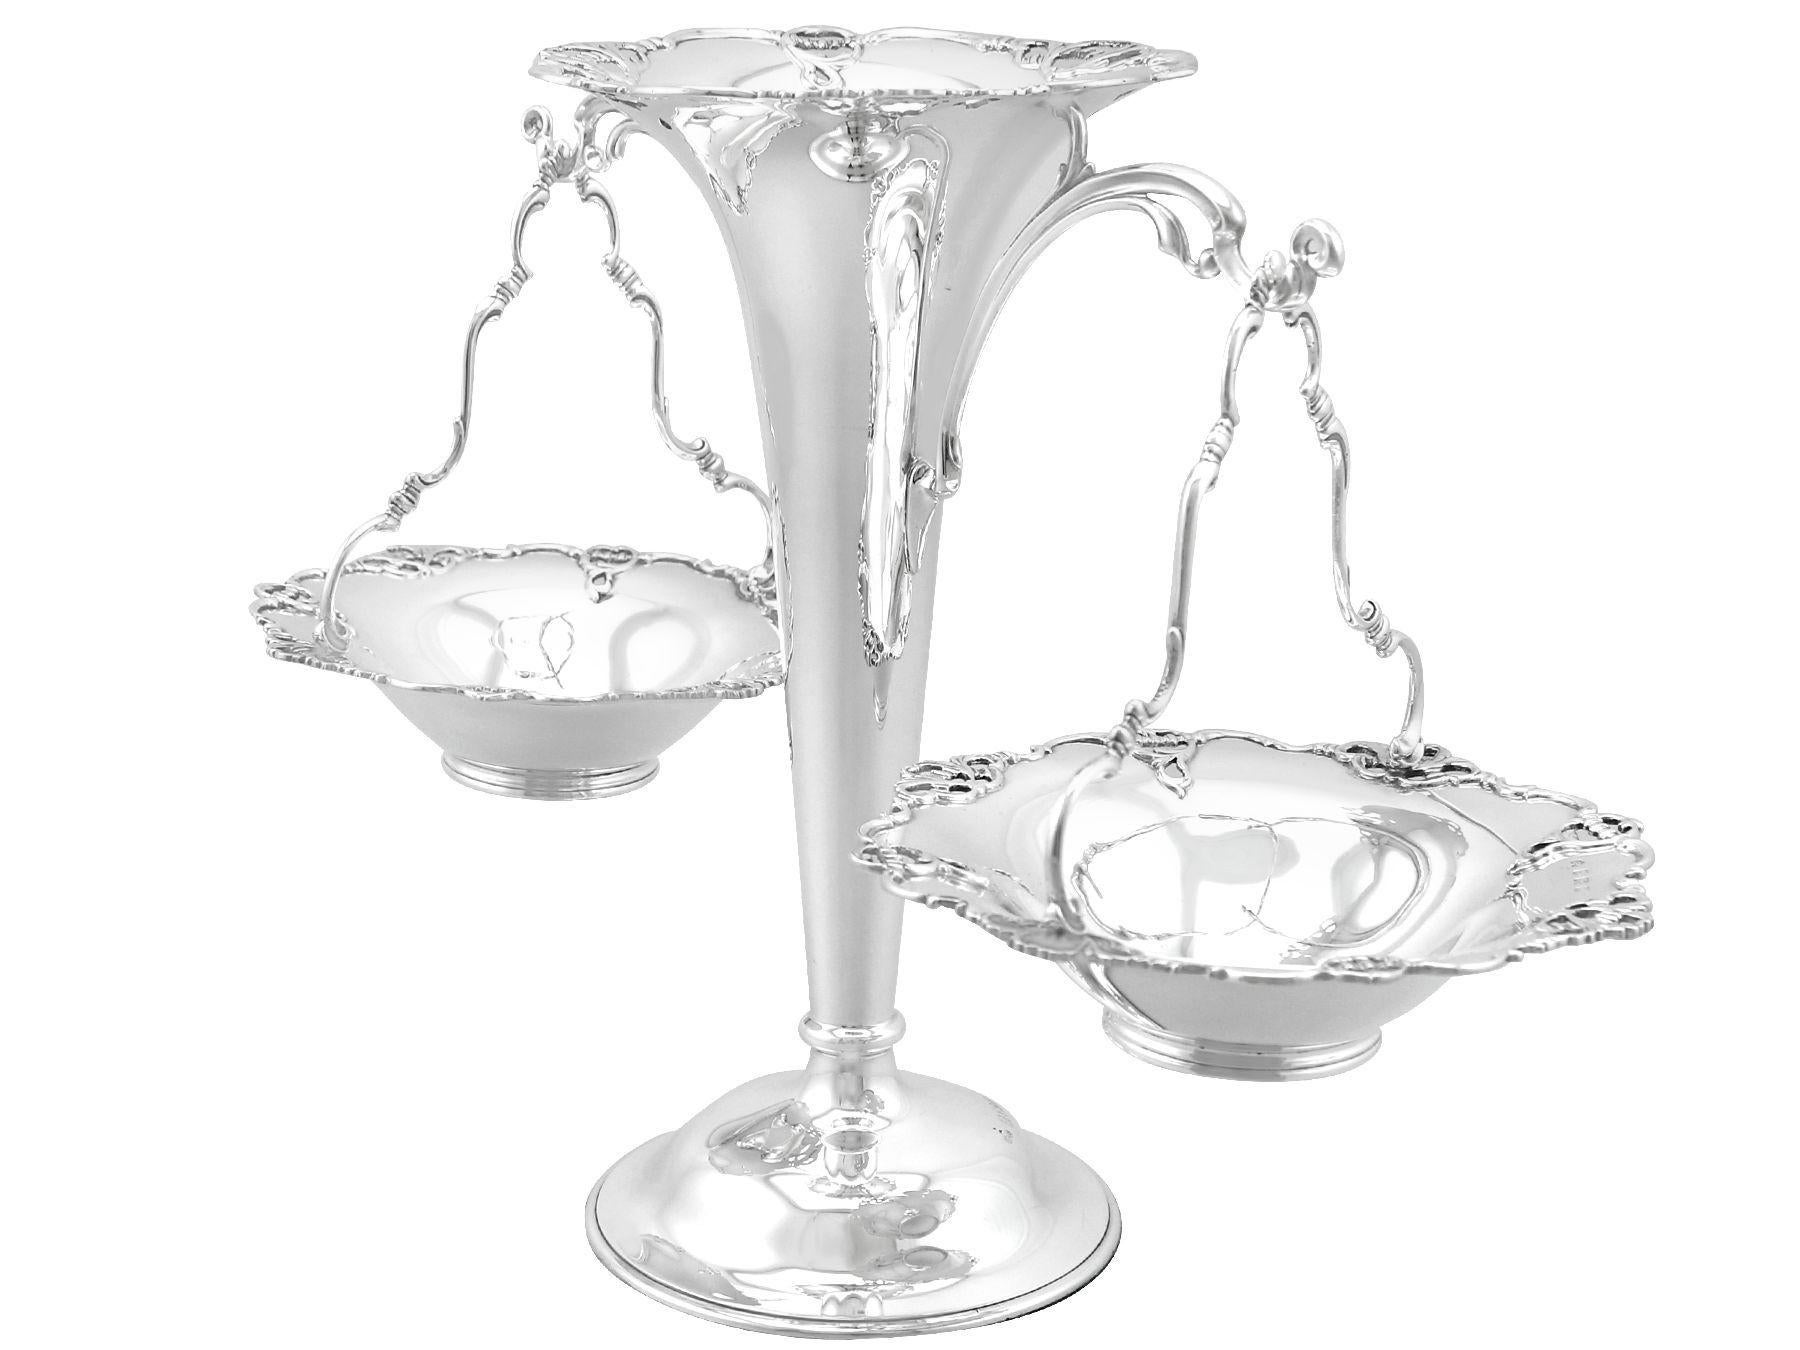 An exceptional, fine and impressive antique George V English sterling silver epergne with hanging baskets; an addition to our ornamental silverware collection.

This exceptional antique George V sterling silver centrepiece/epergne has tapering